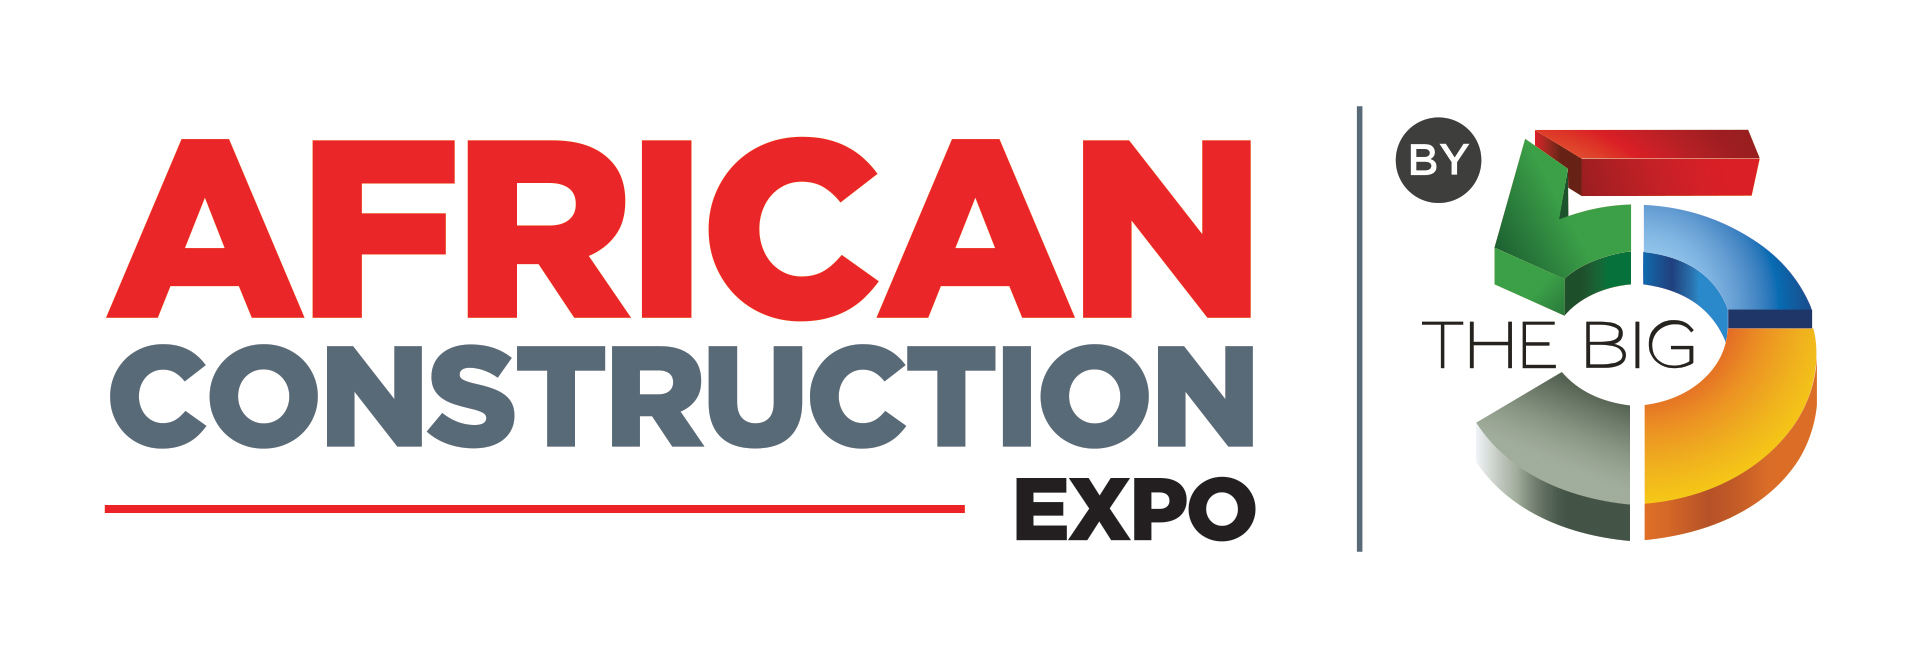 African Construction Expo:  Gallagher Convention Centre, Johannesburg, South Africa